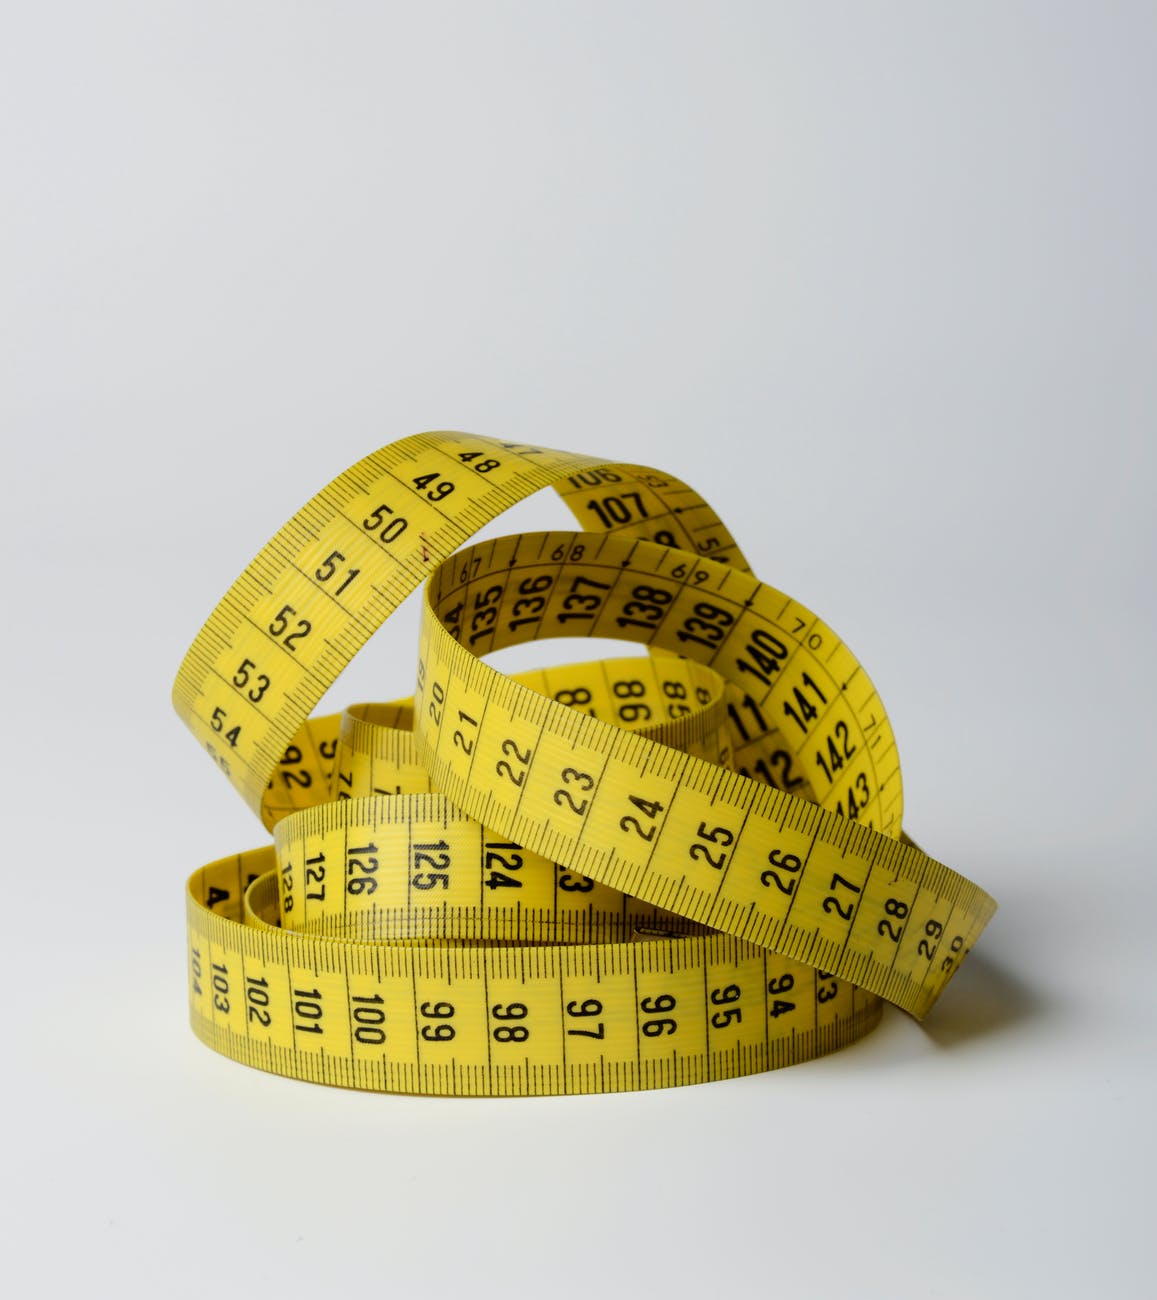 close up photo of yellow tape measure